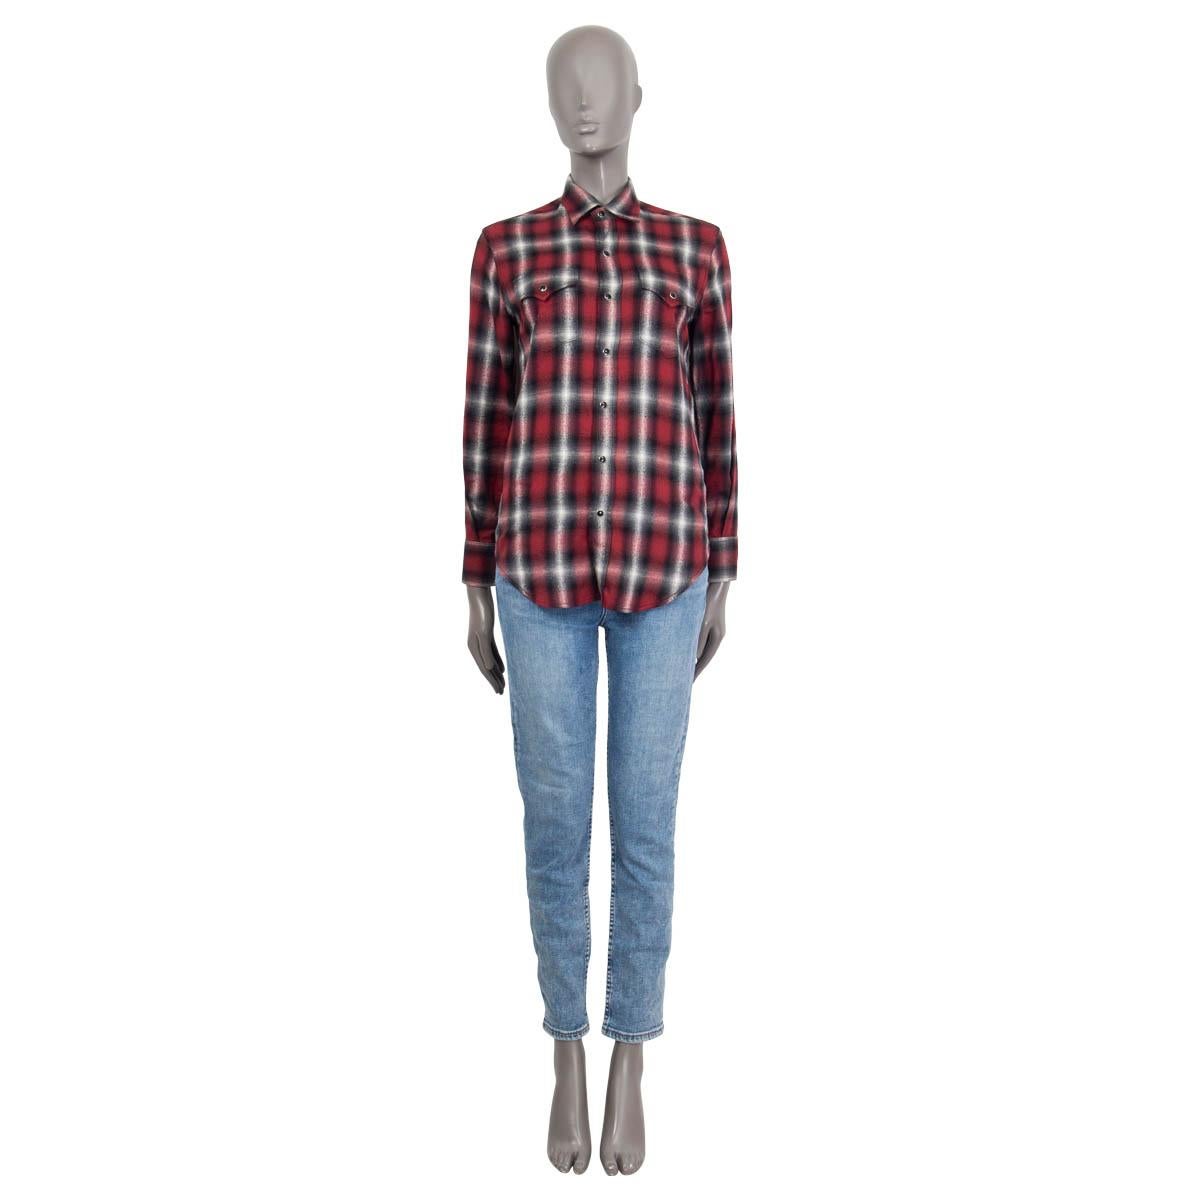 100% authentic Saint Laurent long sleeve flannel shirt in red, gray, white and black cotton (58%) and lyocell (42%). Features two buttoned flap pockets at the chest and buttoned cuffs. Opens with seven push buttons on the front. Unlined. Has been